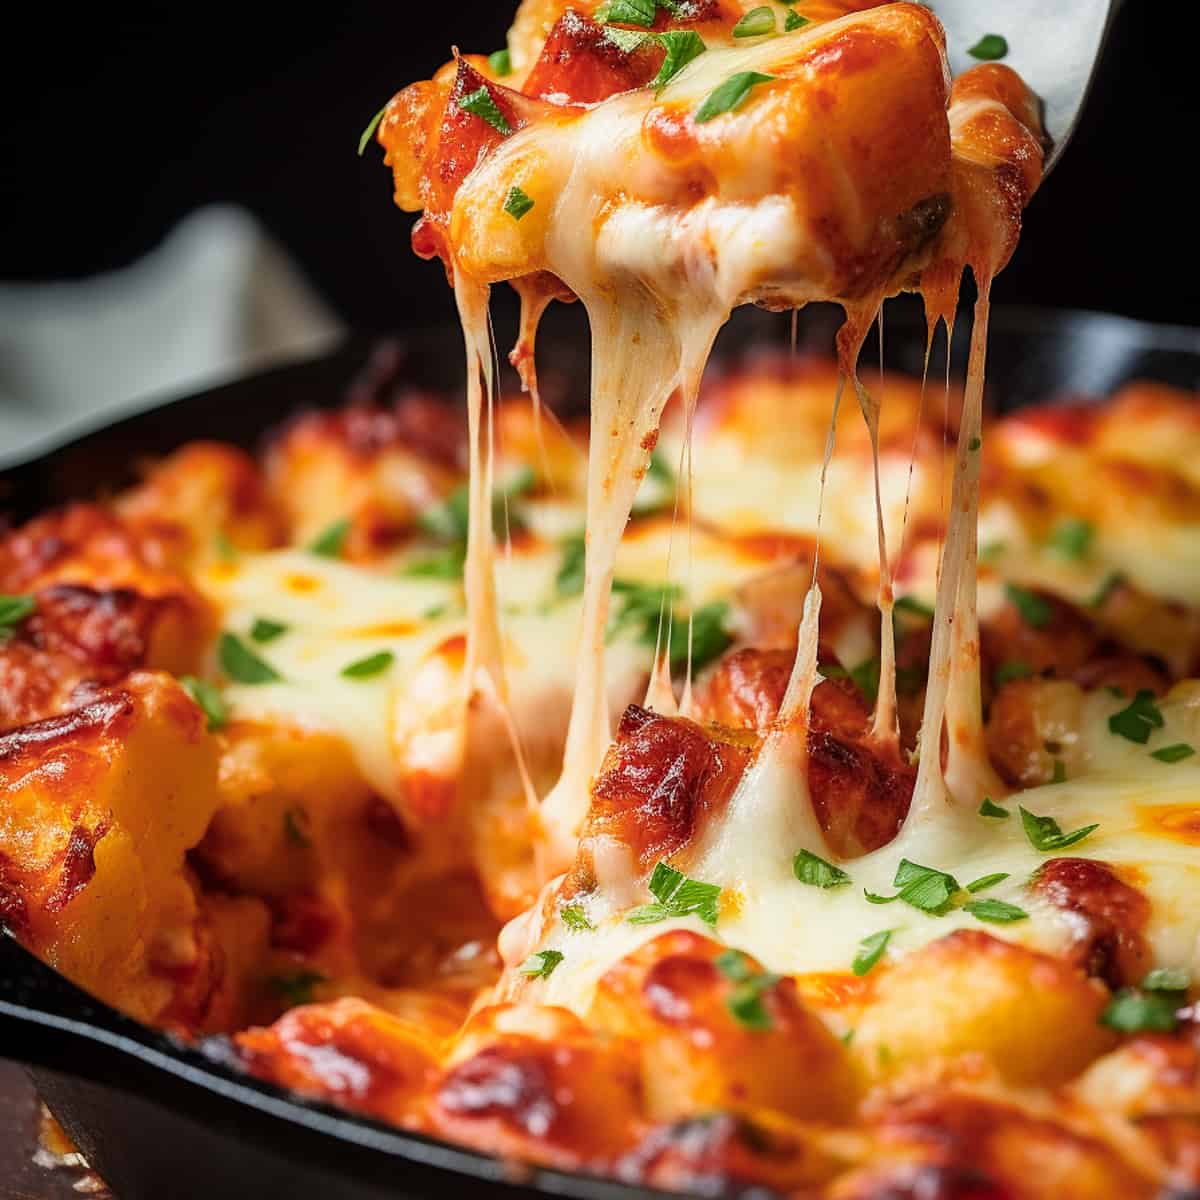 Baked gnocchi with lots of melted cheese.